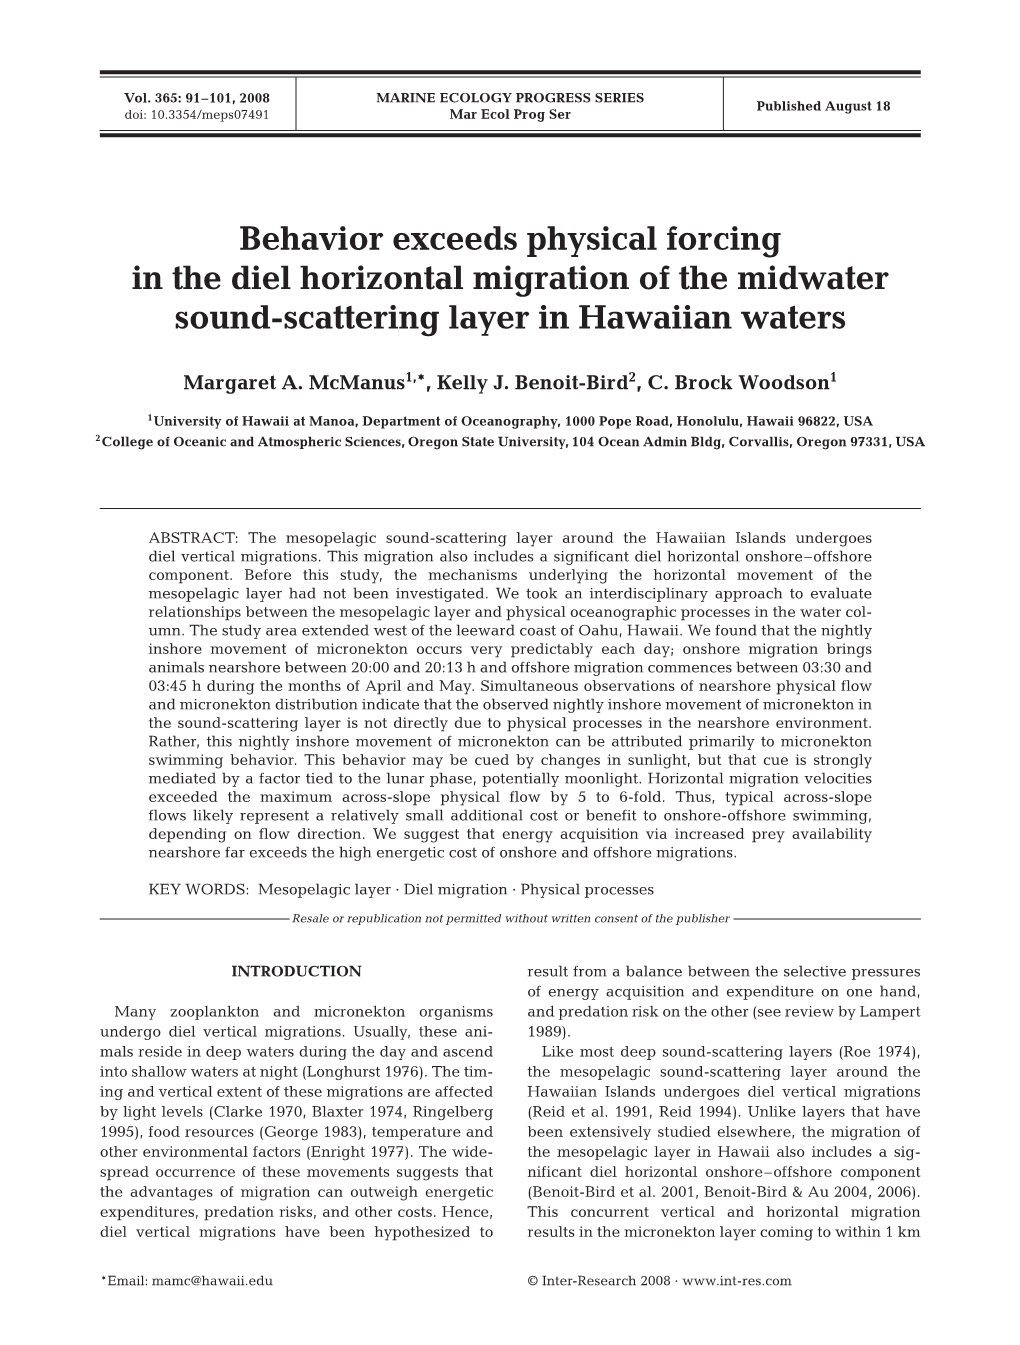 Behavior Exceeds Physical Forcing in the Diel Horizontal Migration of the Midwater Sound-Scattering Layer in Hawaiian Waters